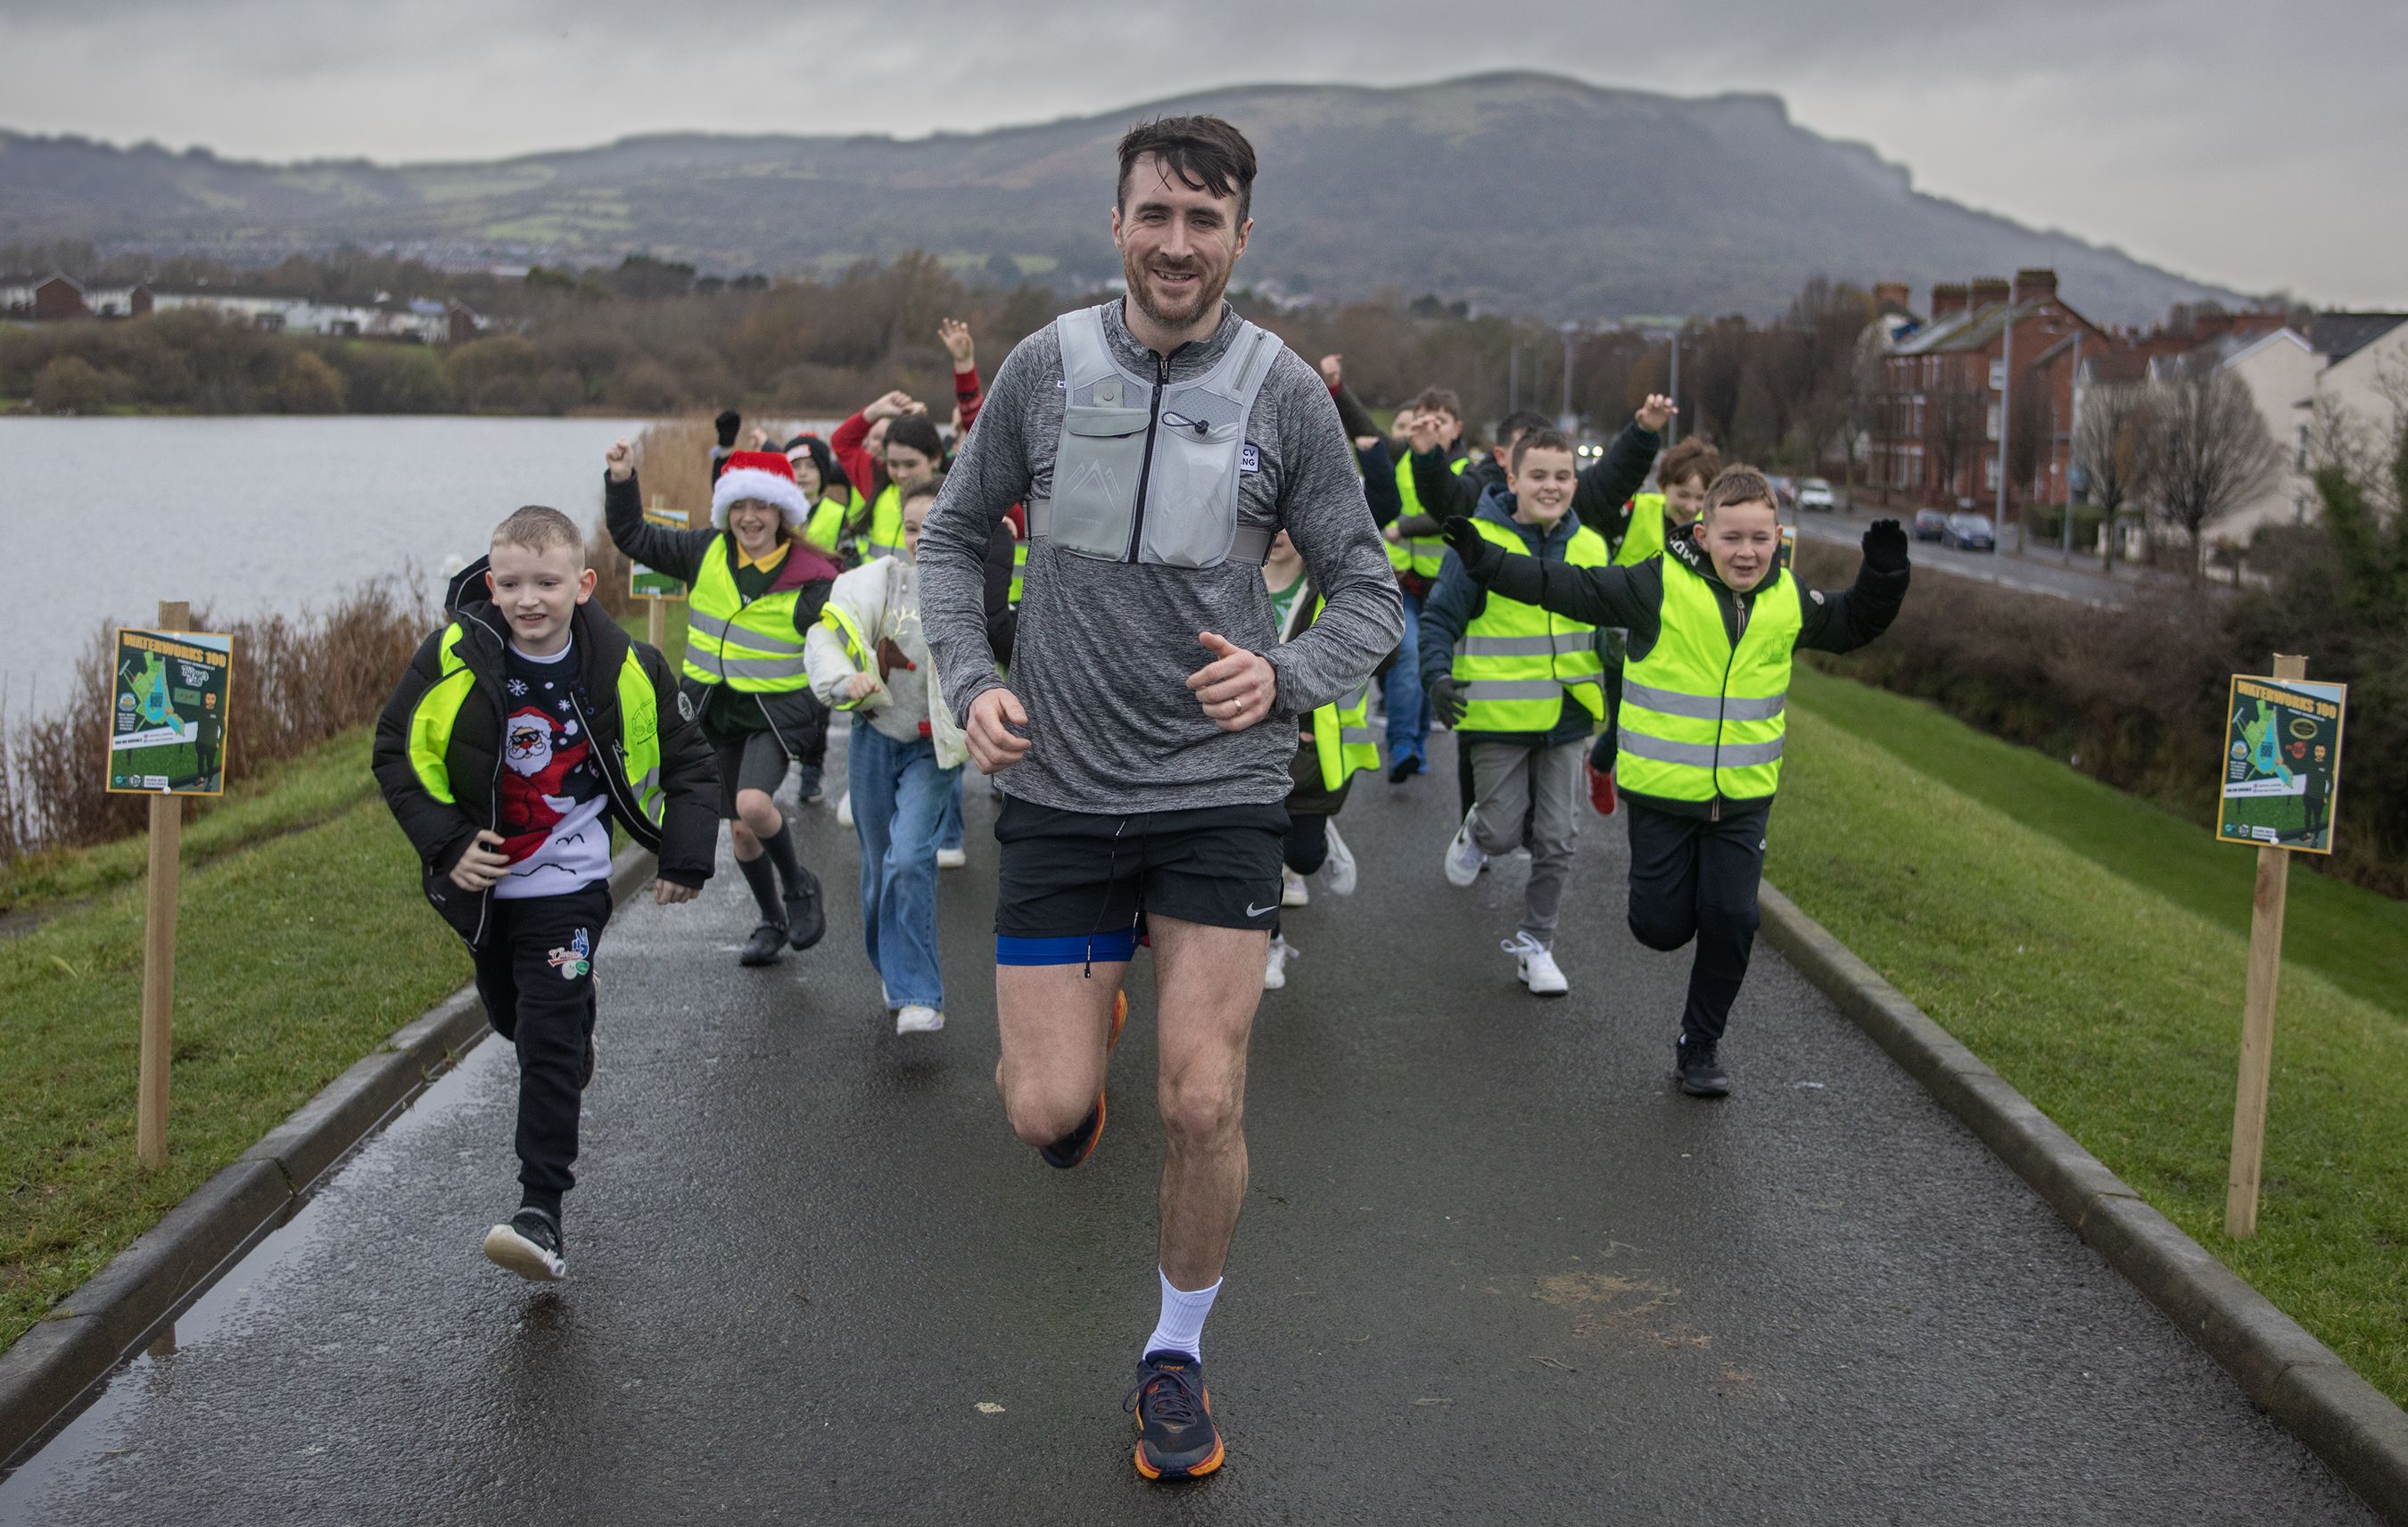 WATERWORKS CHALLENGE: Oisín McVicker with the support of local school kids